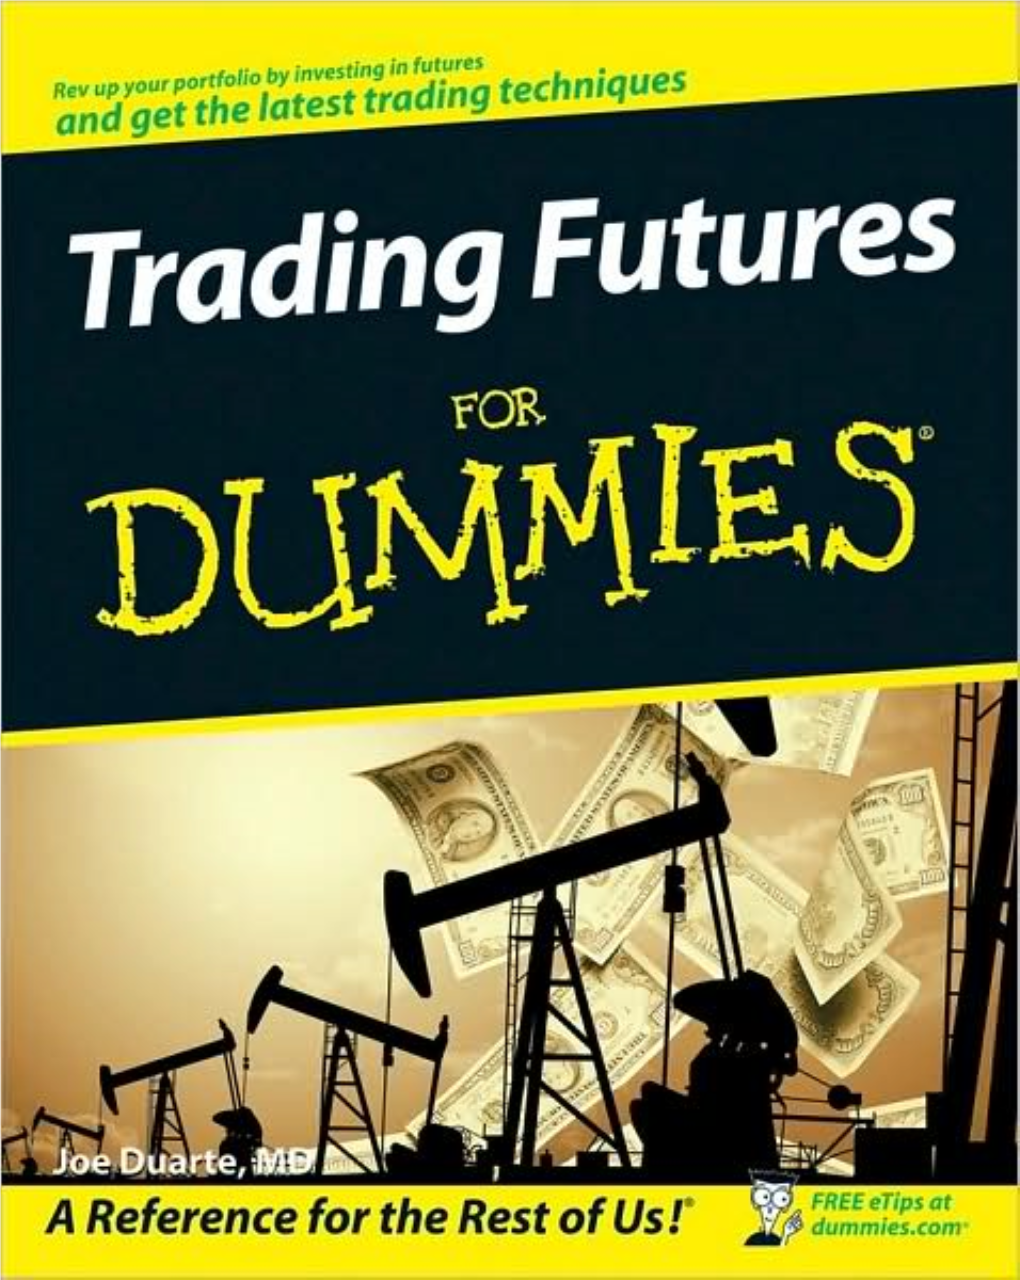 Trading Futures for Dummies‰